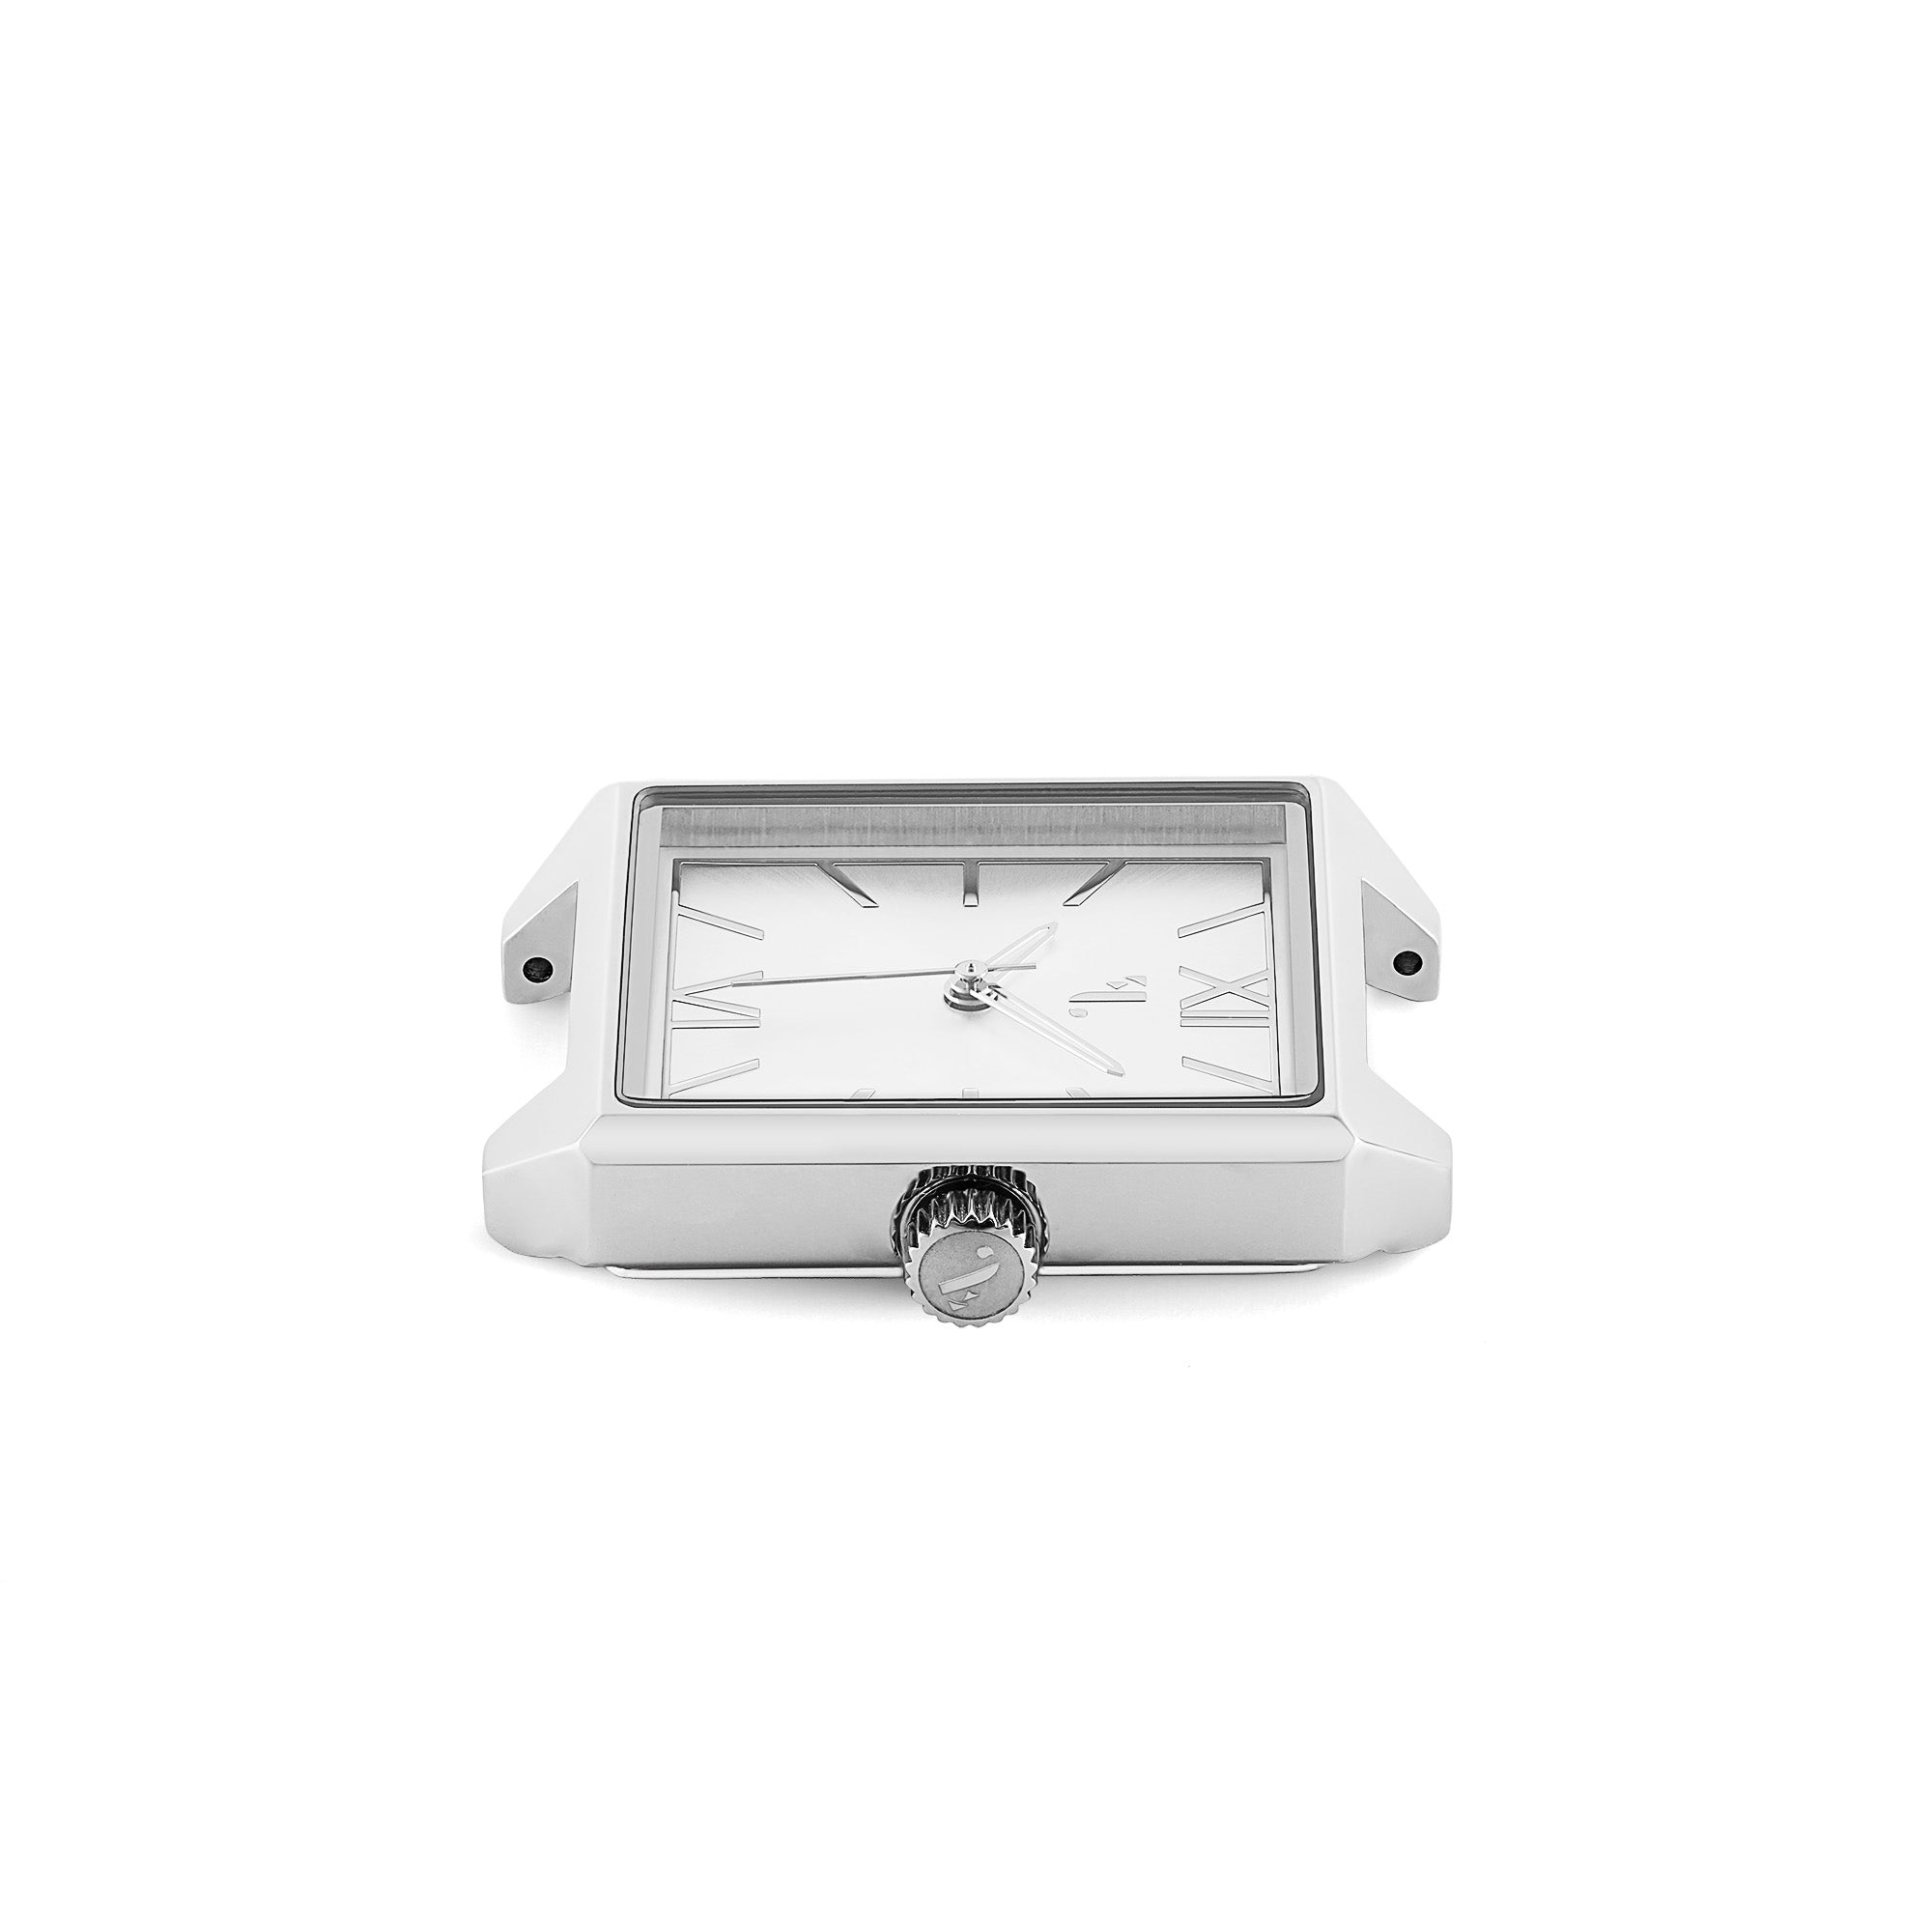 Ixelles watch. It is made of a square silver case and a shiny silver dial. It is the ideal watch for a women, with its three hands, its quartz mechanism, its water resistance and its 2 year warranty.